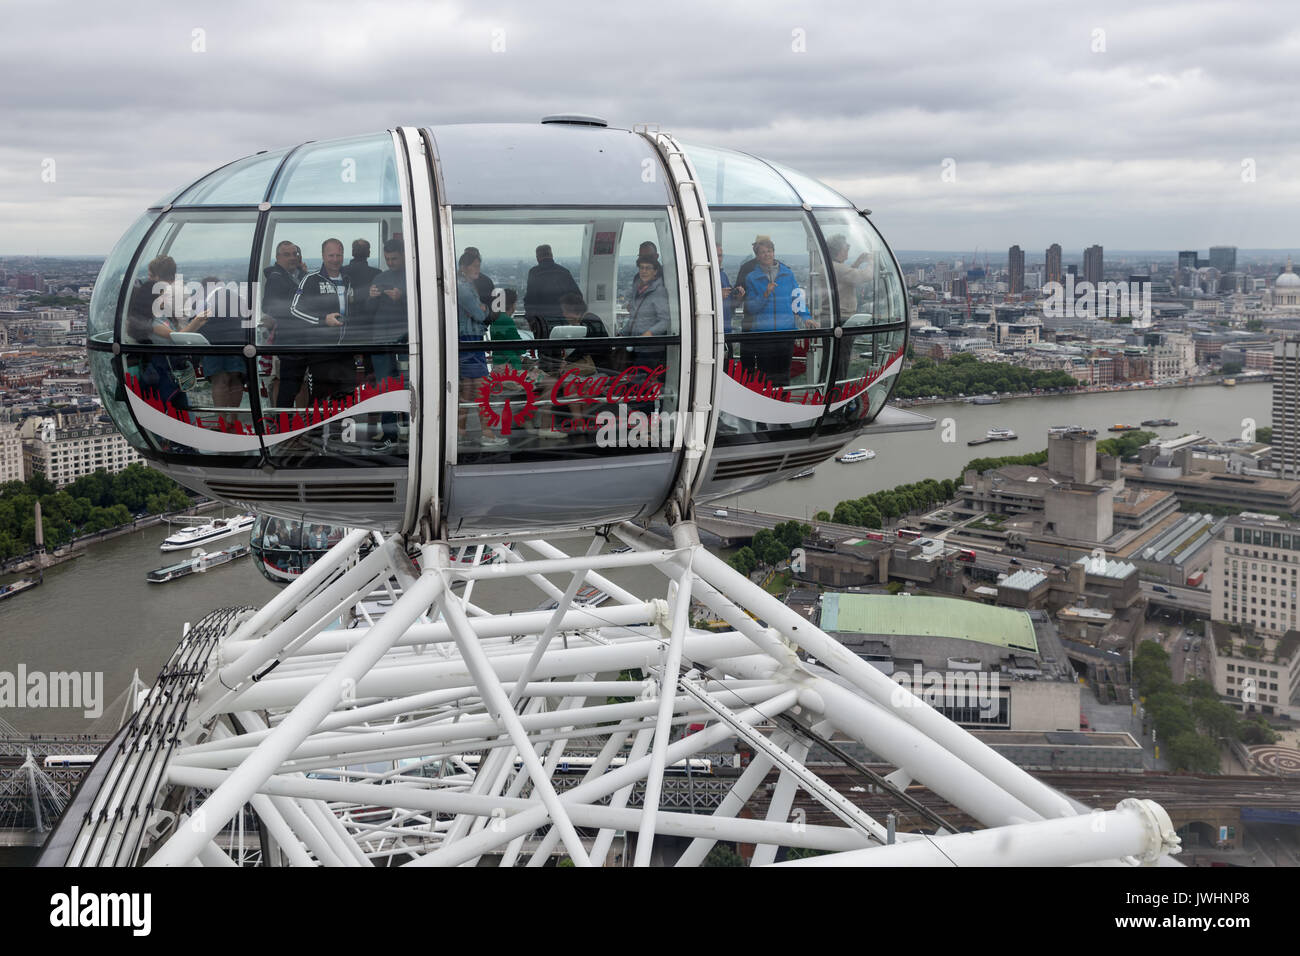 LONDON, ENGLAND - JUNE 08, 2017: Tourists in cabin London Eye with aerial view at London, England Stock Photo